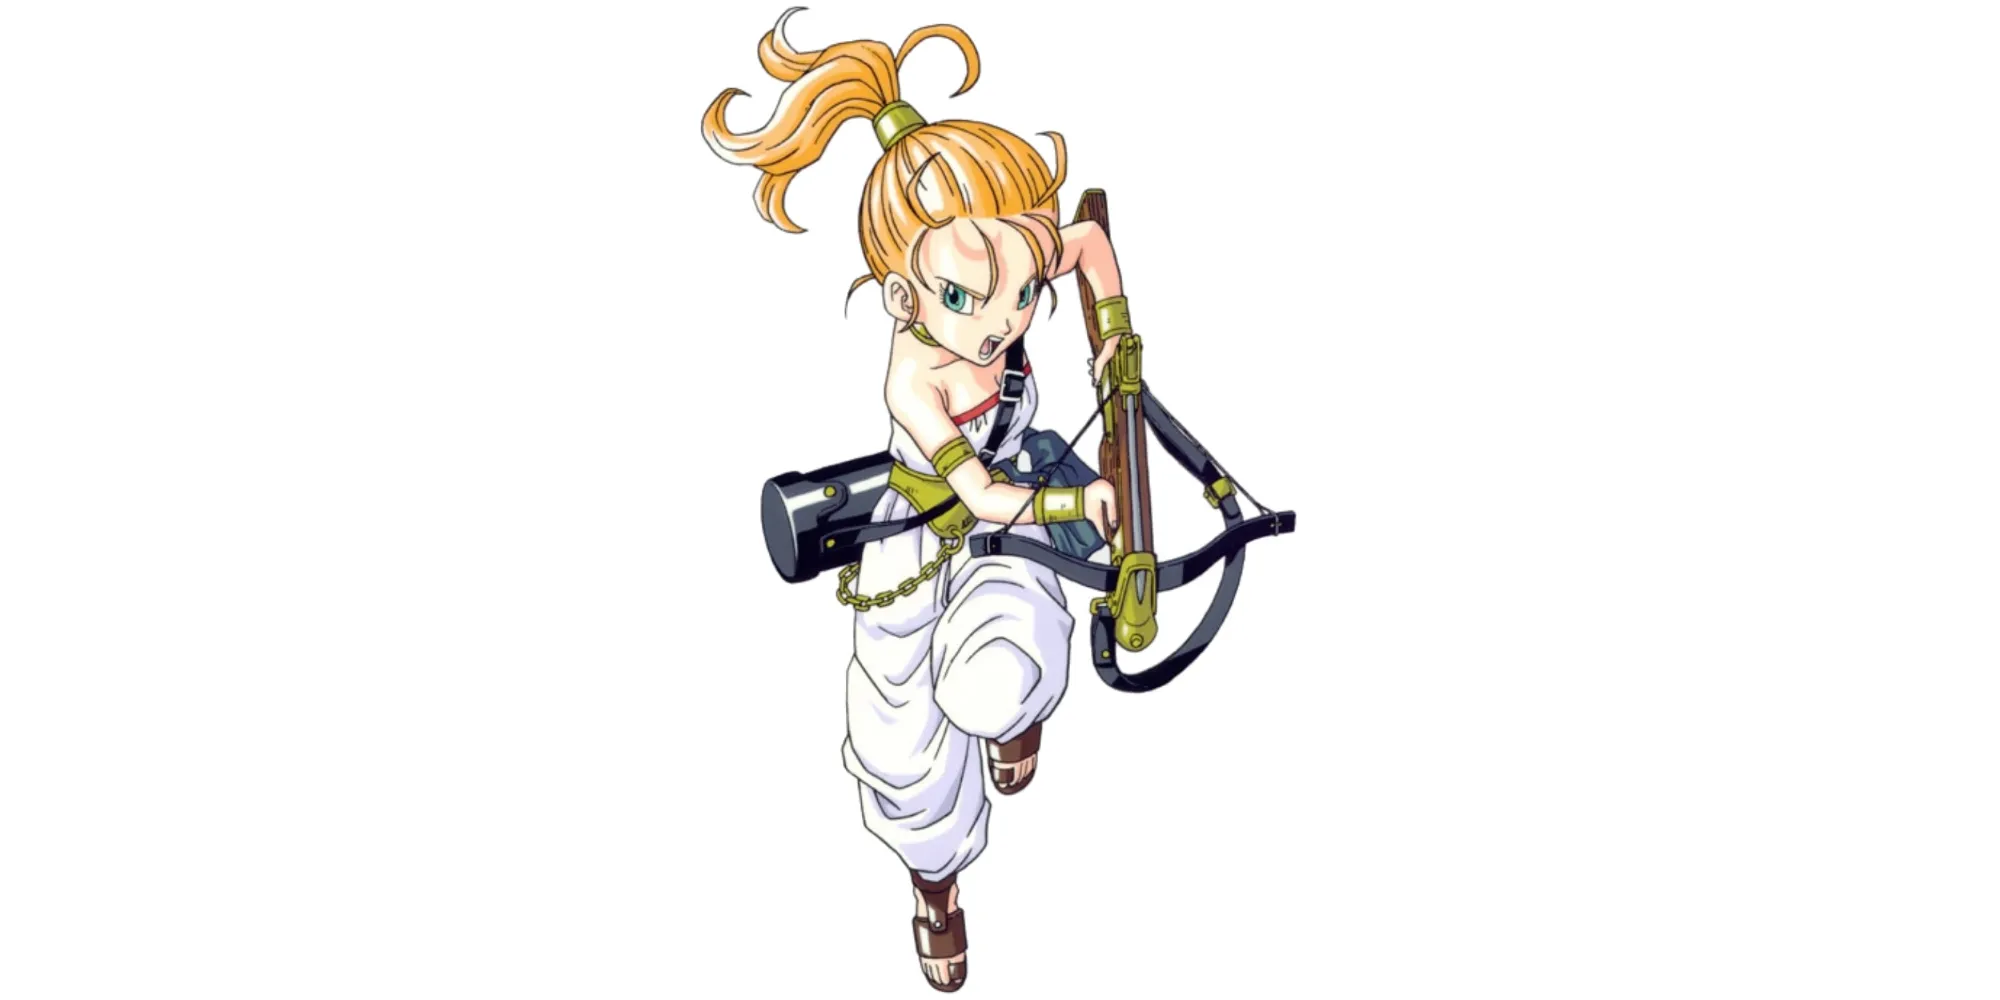 Artwork of Marle from Chrono Trigger